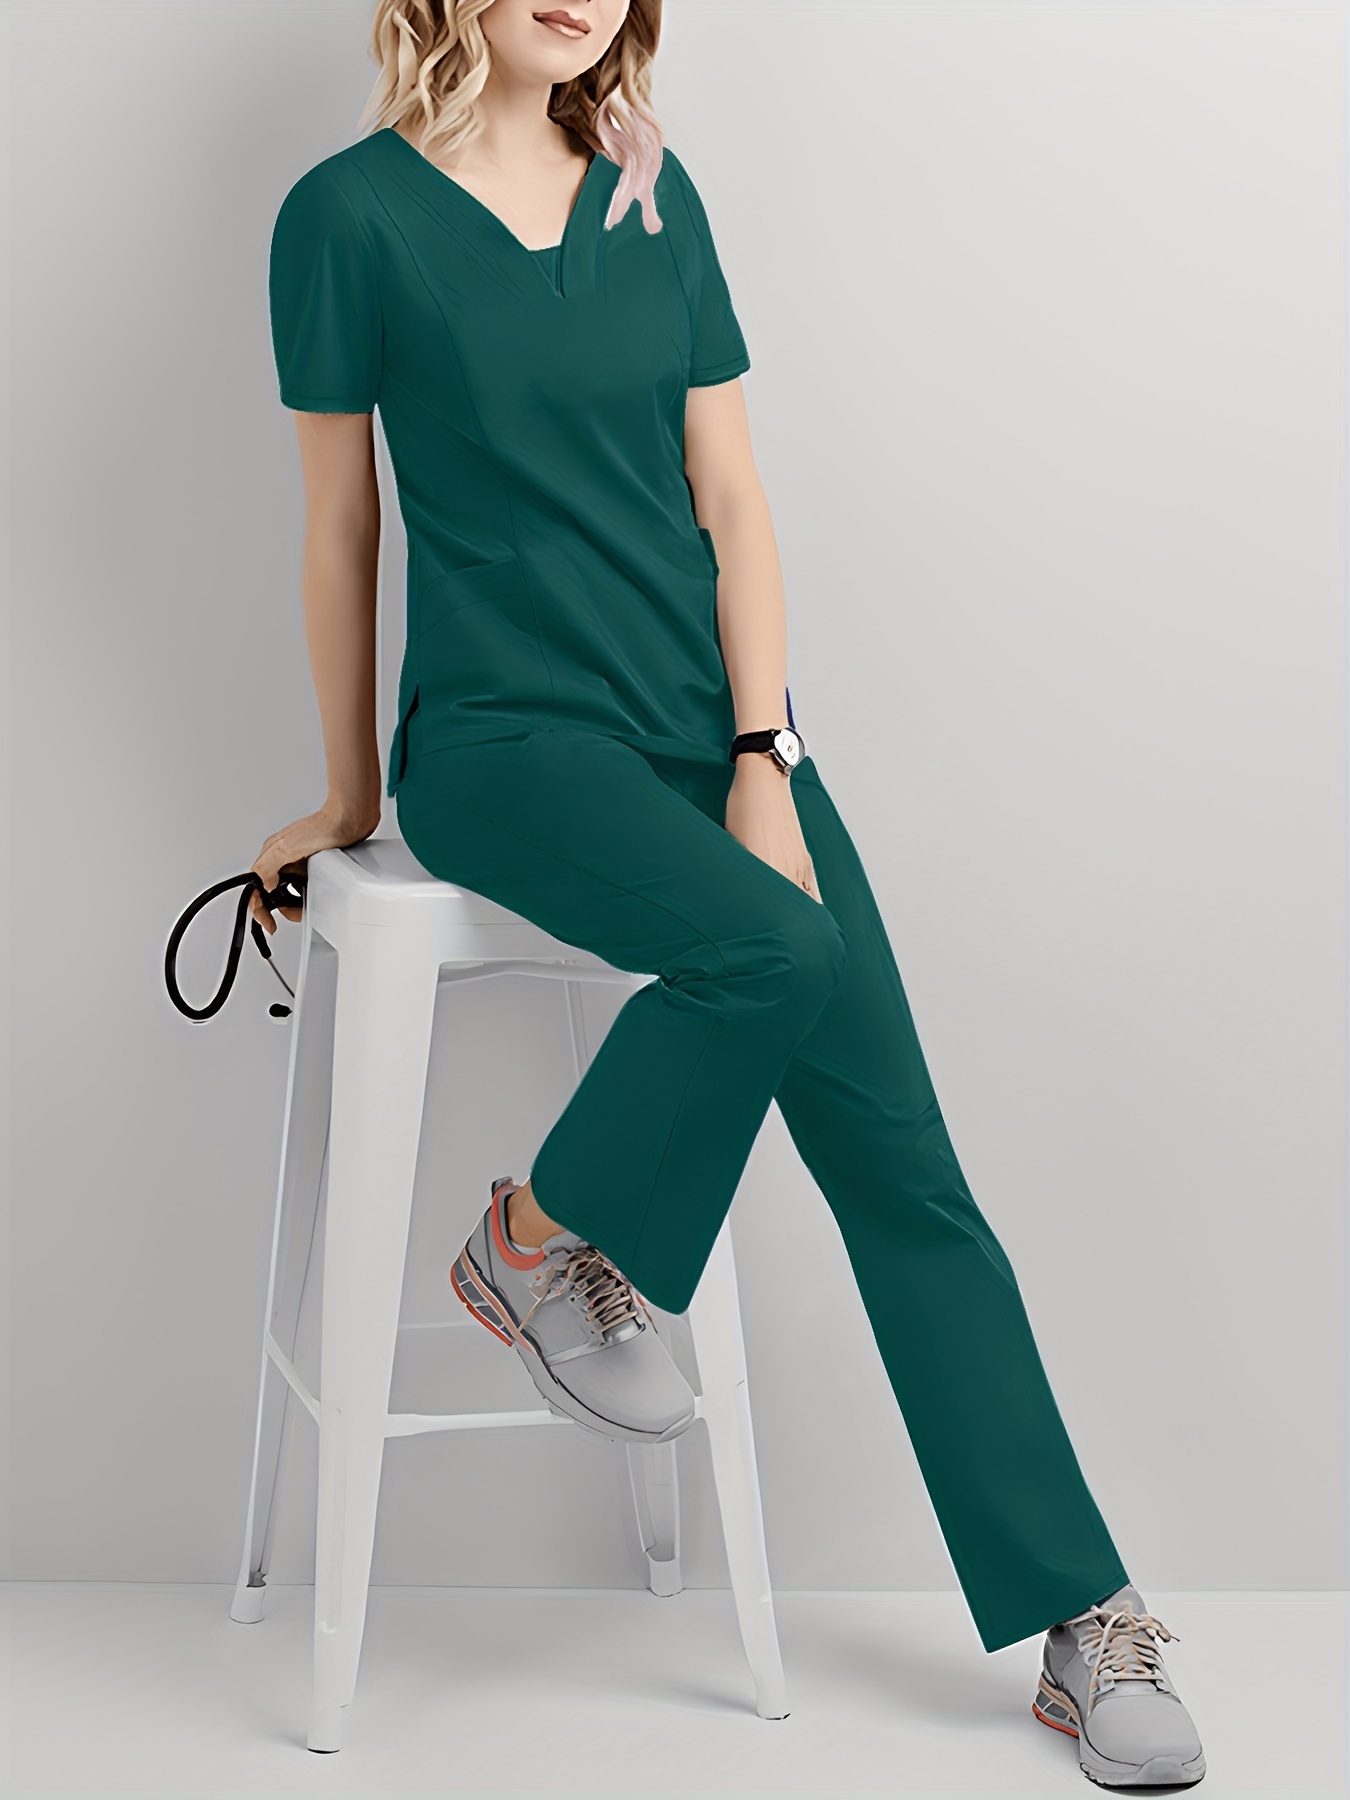 Solid Scrub Two-piece Set, Casual Short Sleeve V Neck Scrub Top & Pants  Outfits, Women's Working Clothing